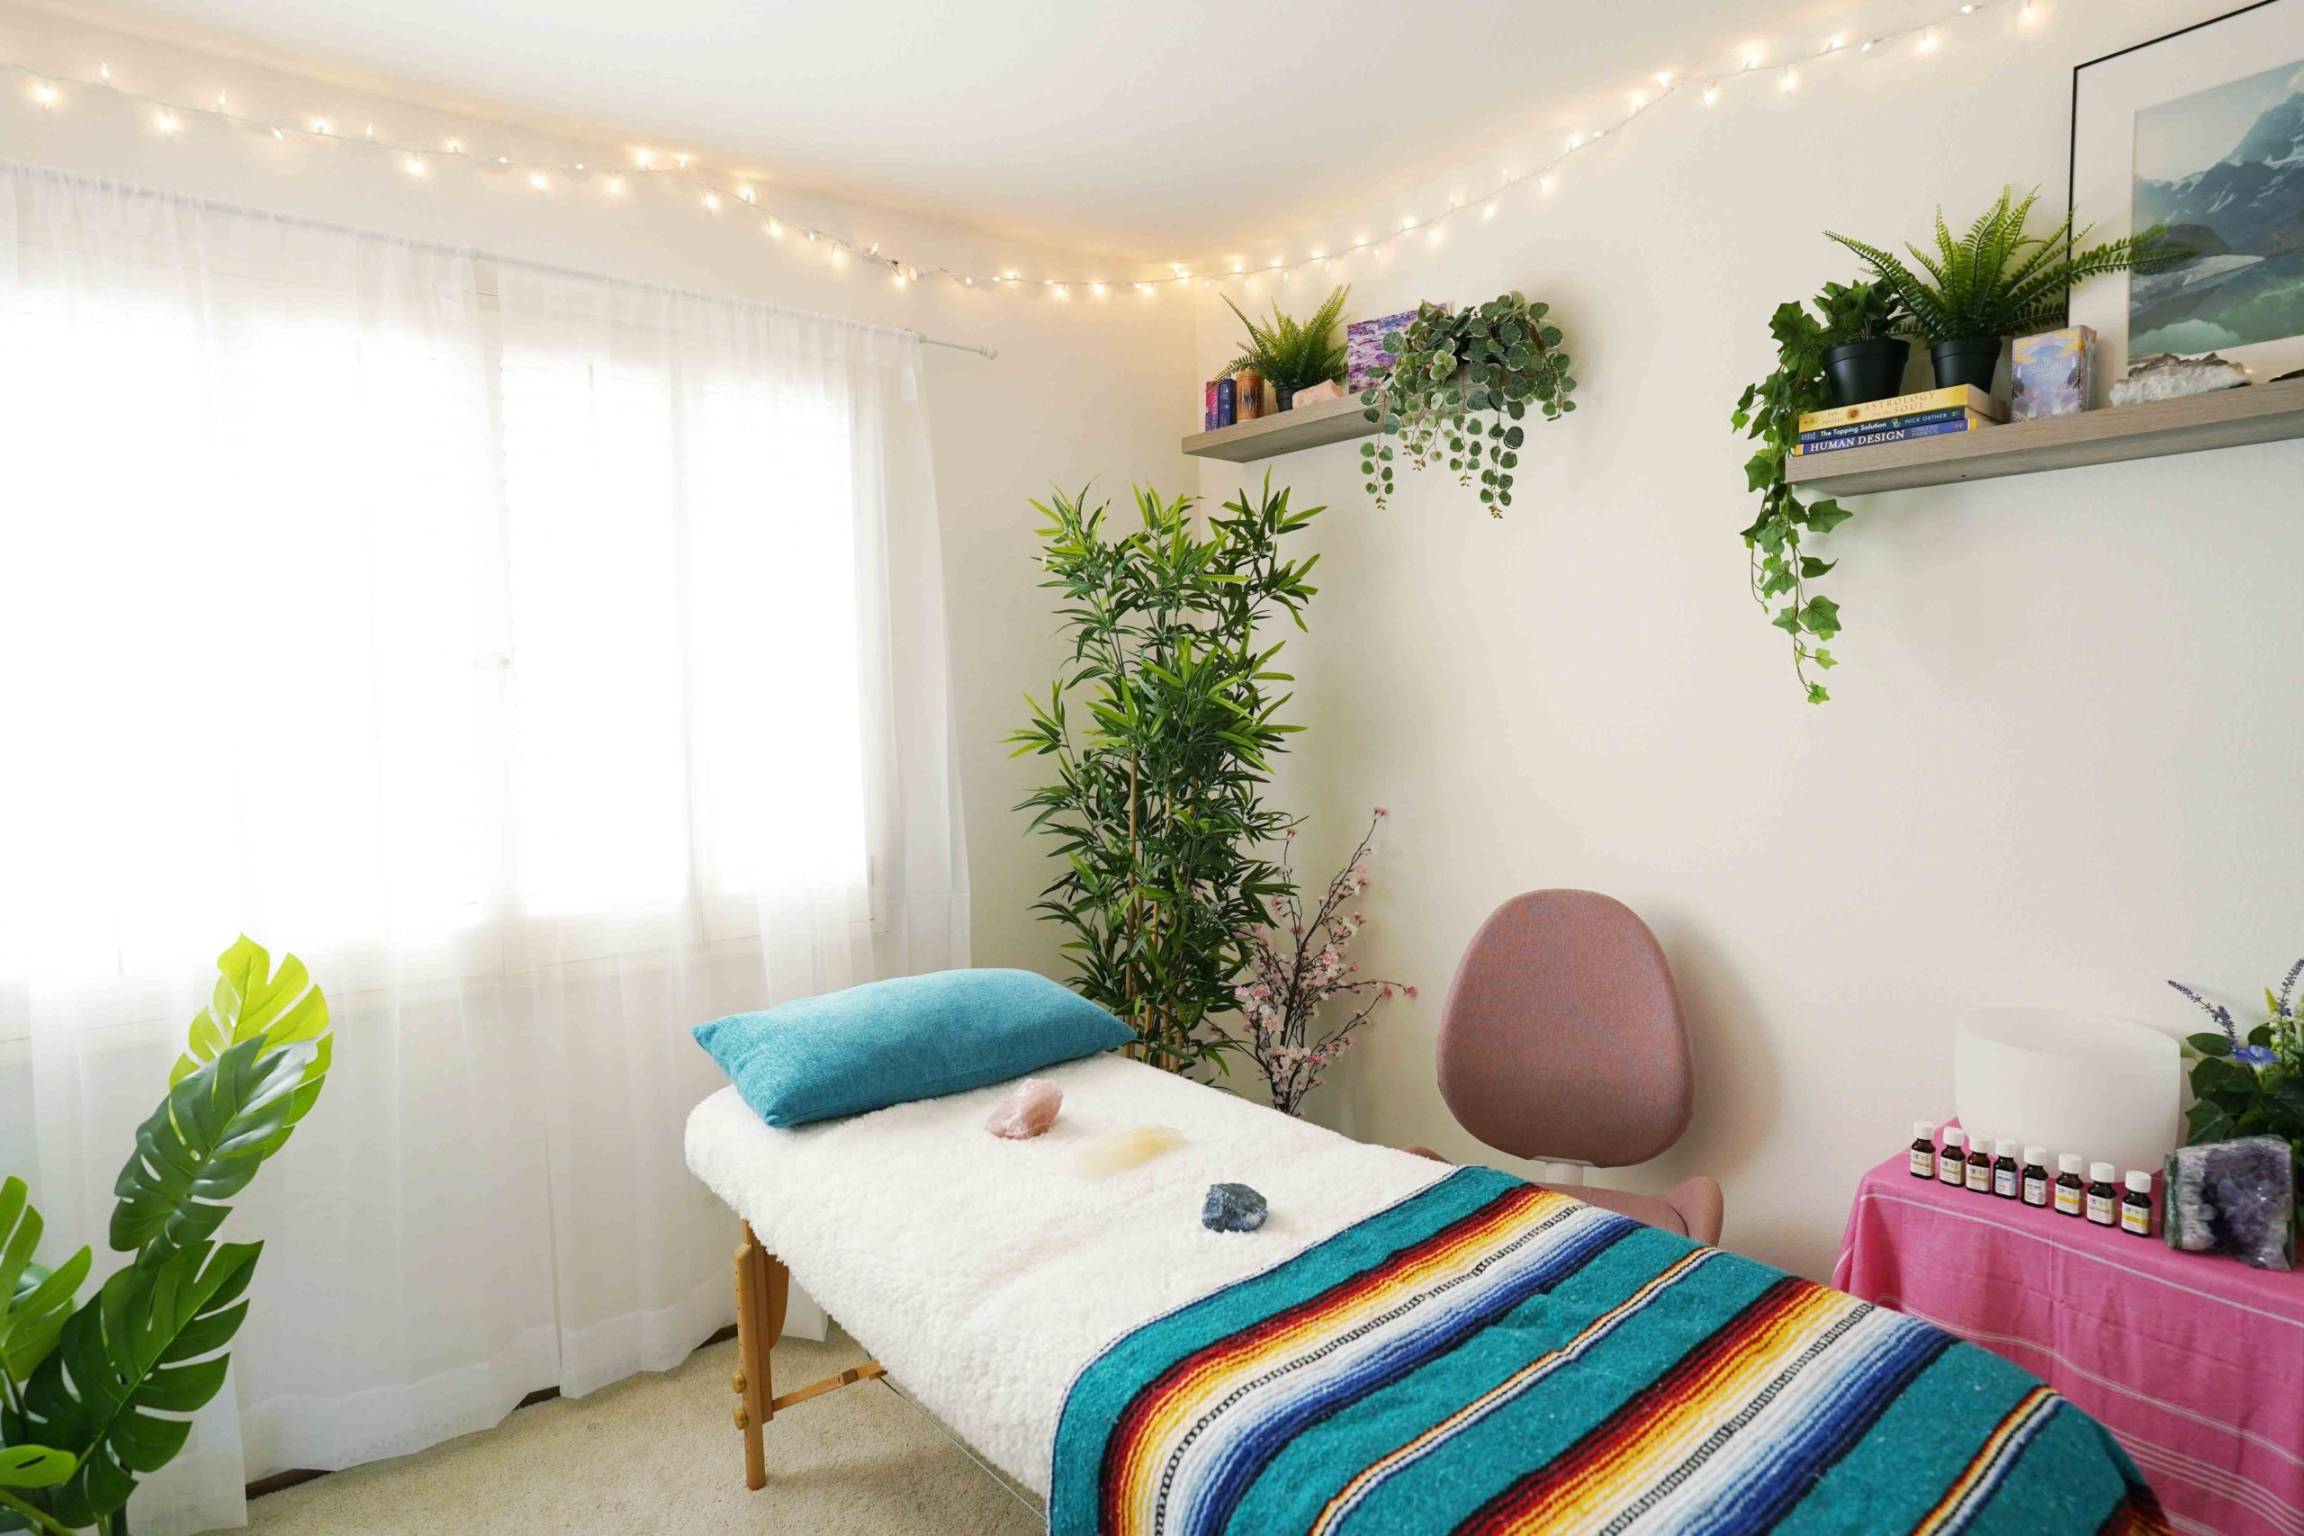 How to Use Reiki with Andrea Vernitsky of The Healer Next Door